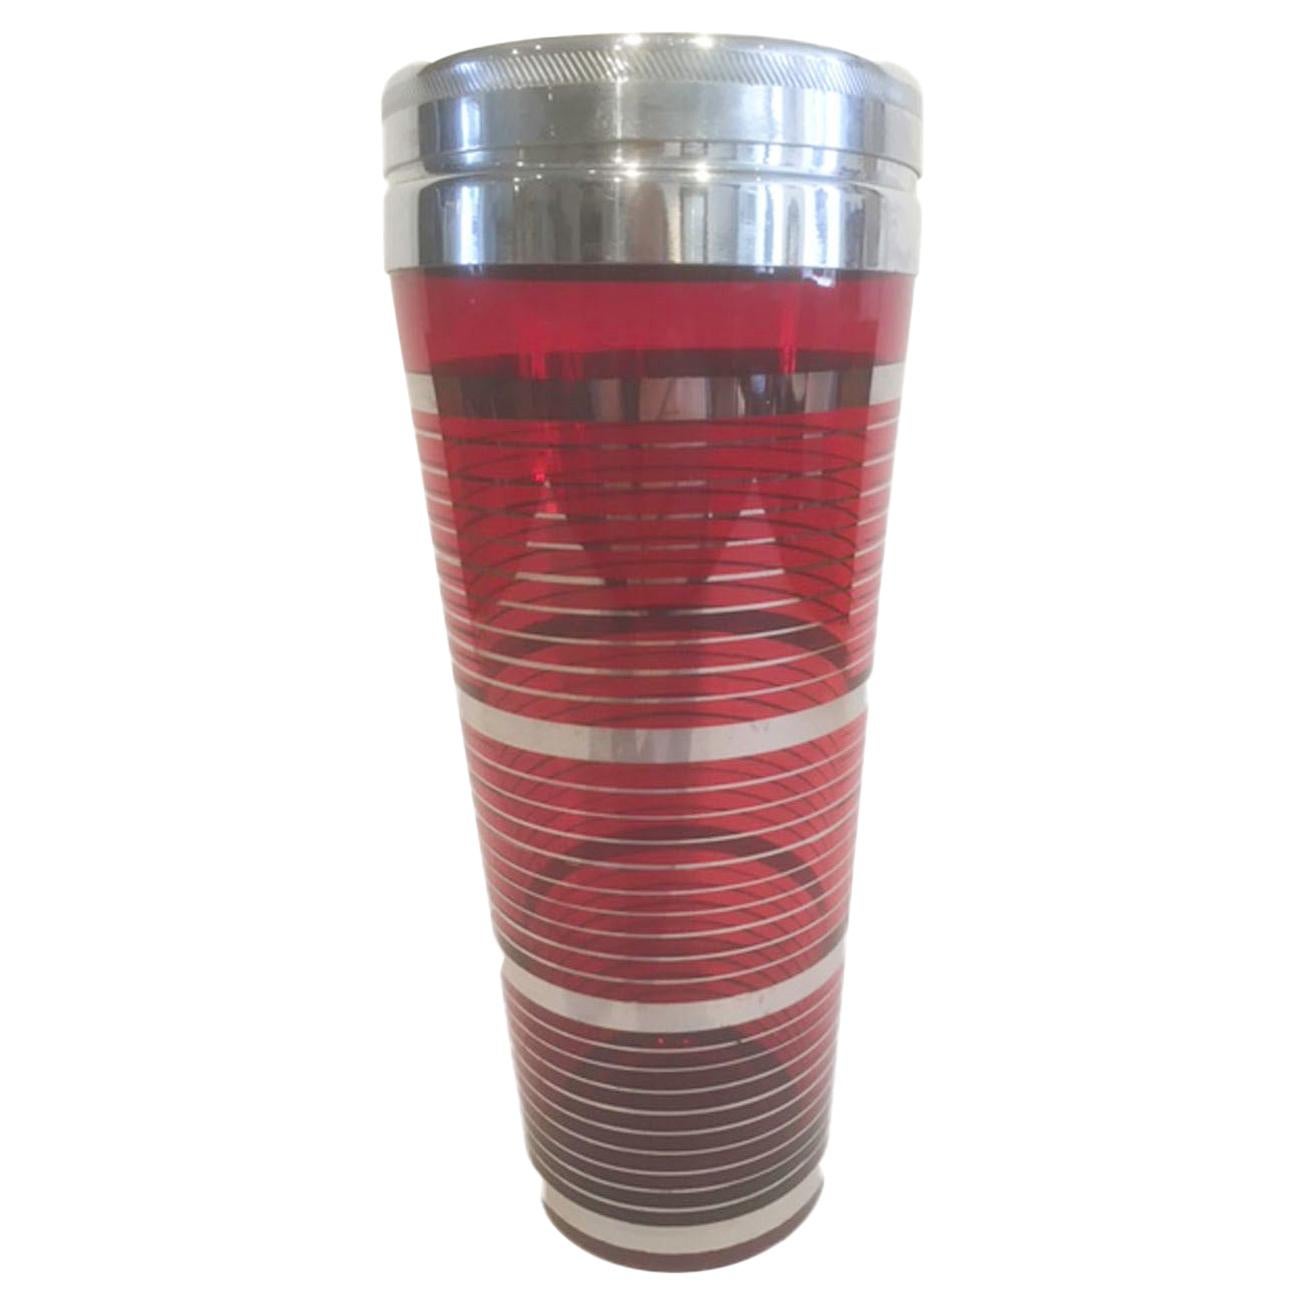 Art Deco Cocktail Shaker, Ruby Red Glass with Silver Bands and Chrome Lid